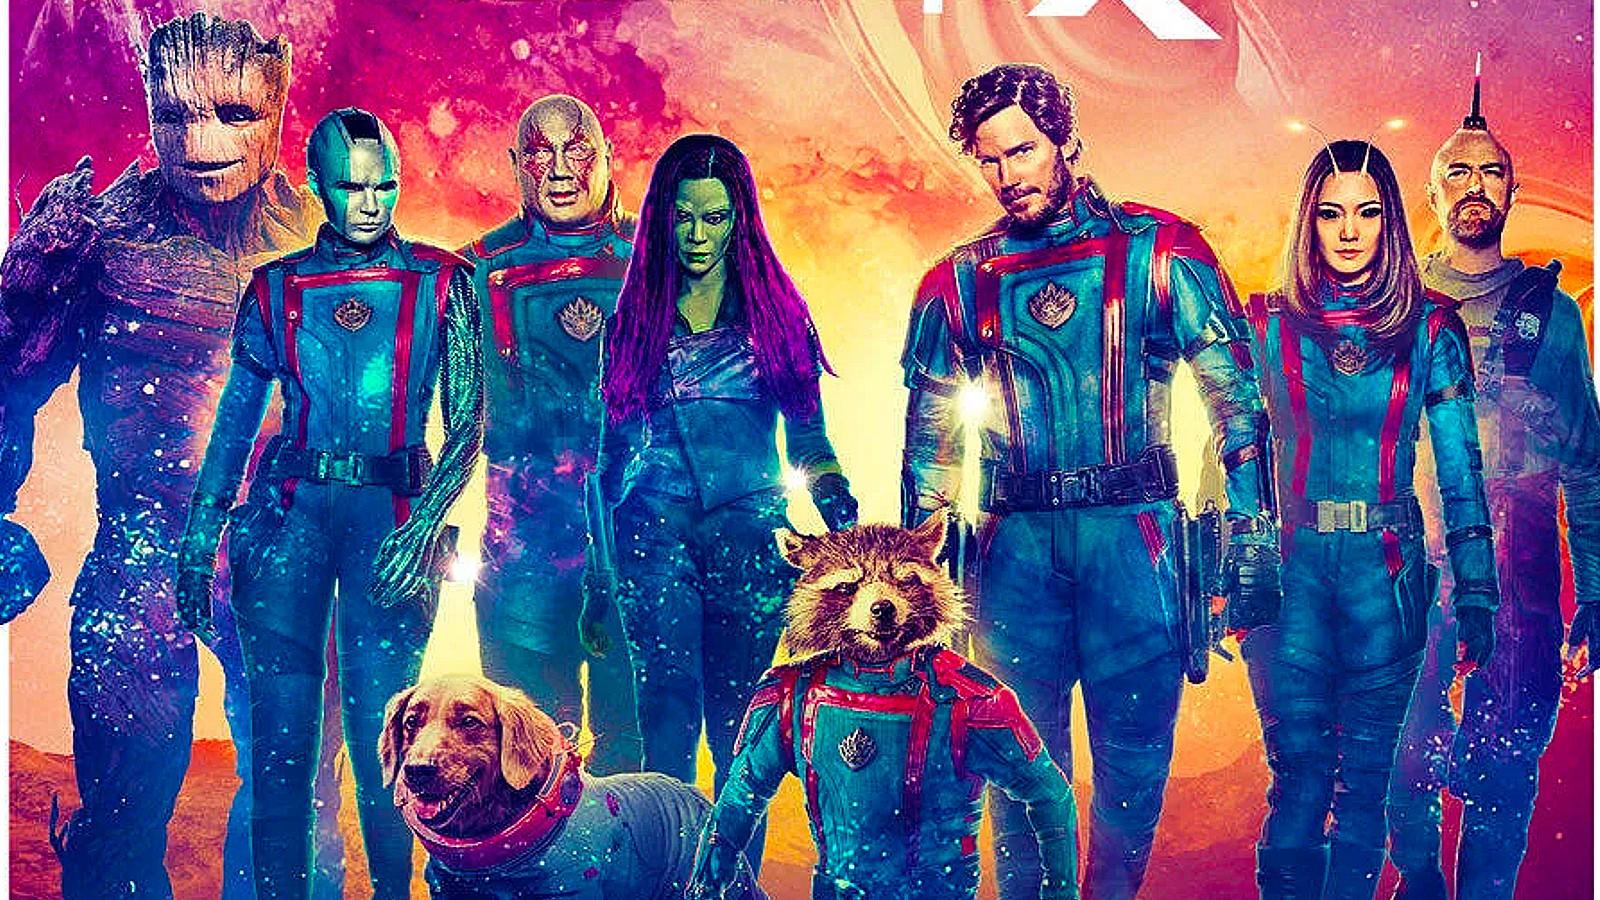 The poster for Guardians of the Galaxy Vol 3